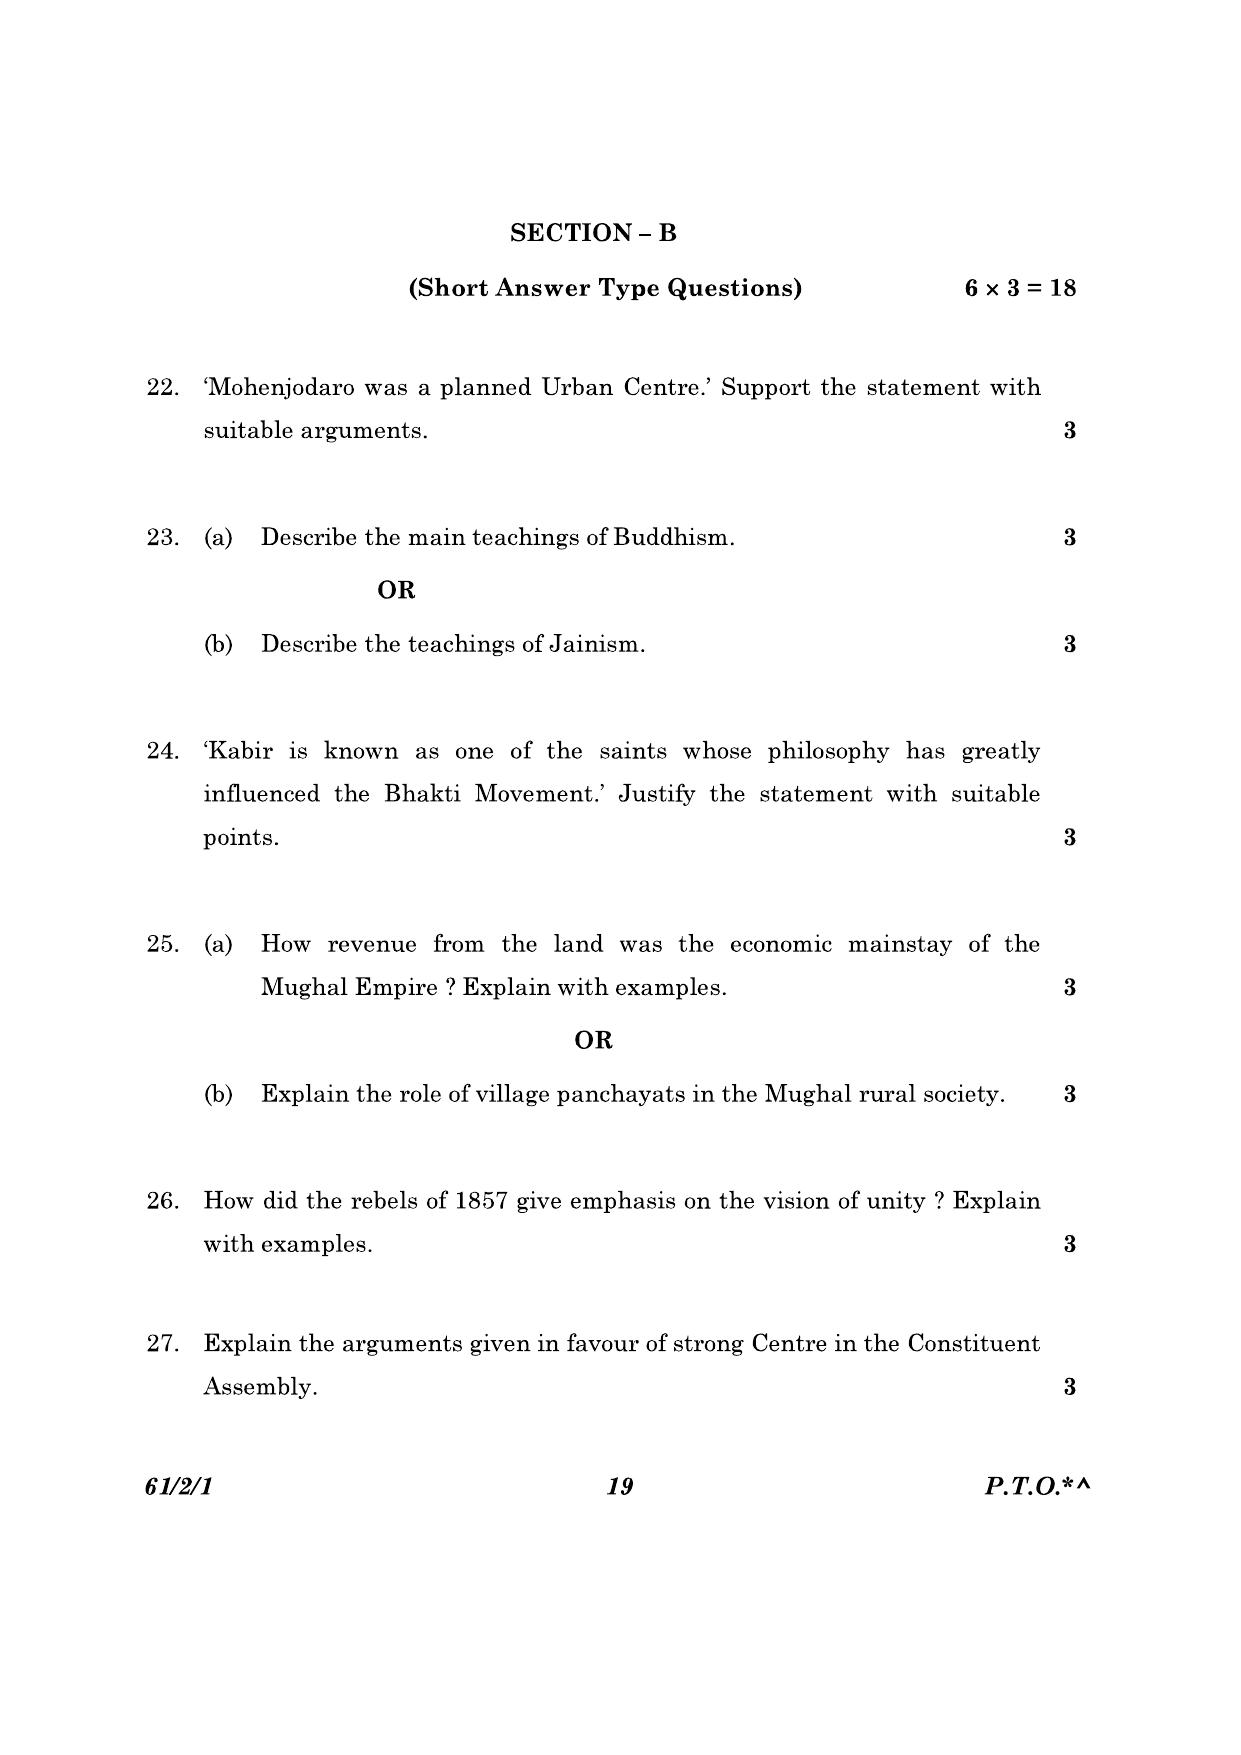 CBSE Class 12 61-2-1 History 2023 Question Paper - Page 19